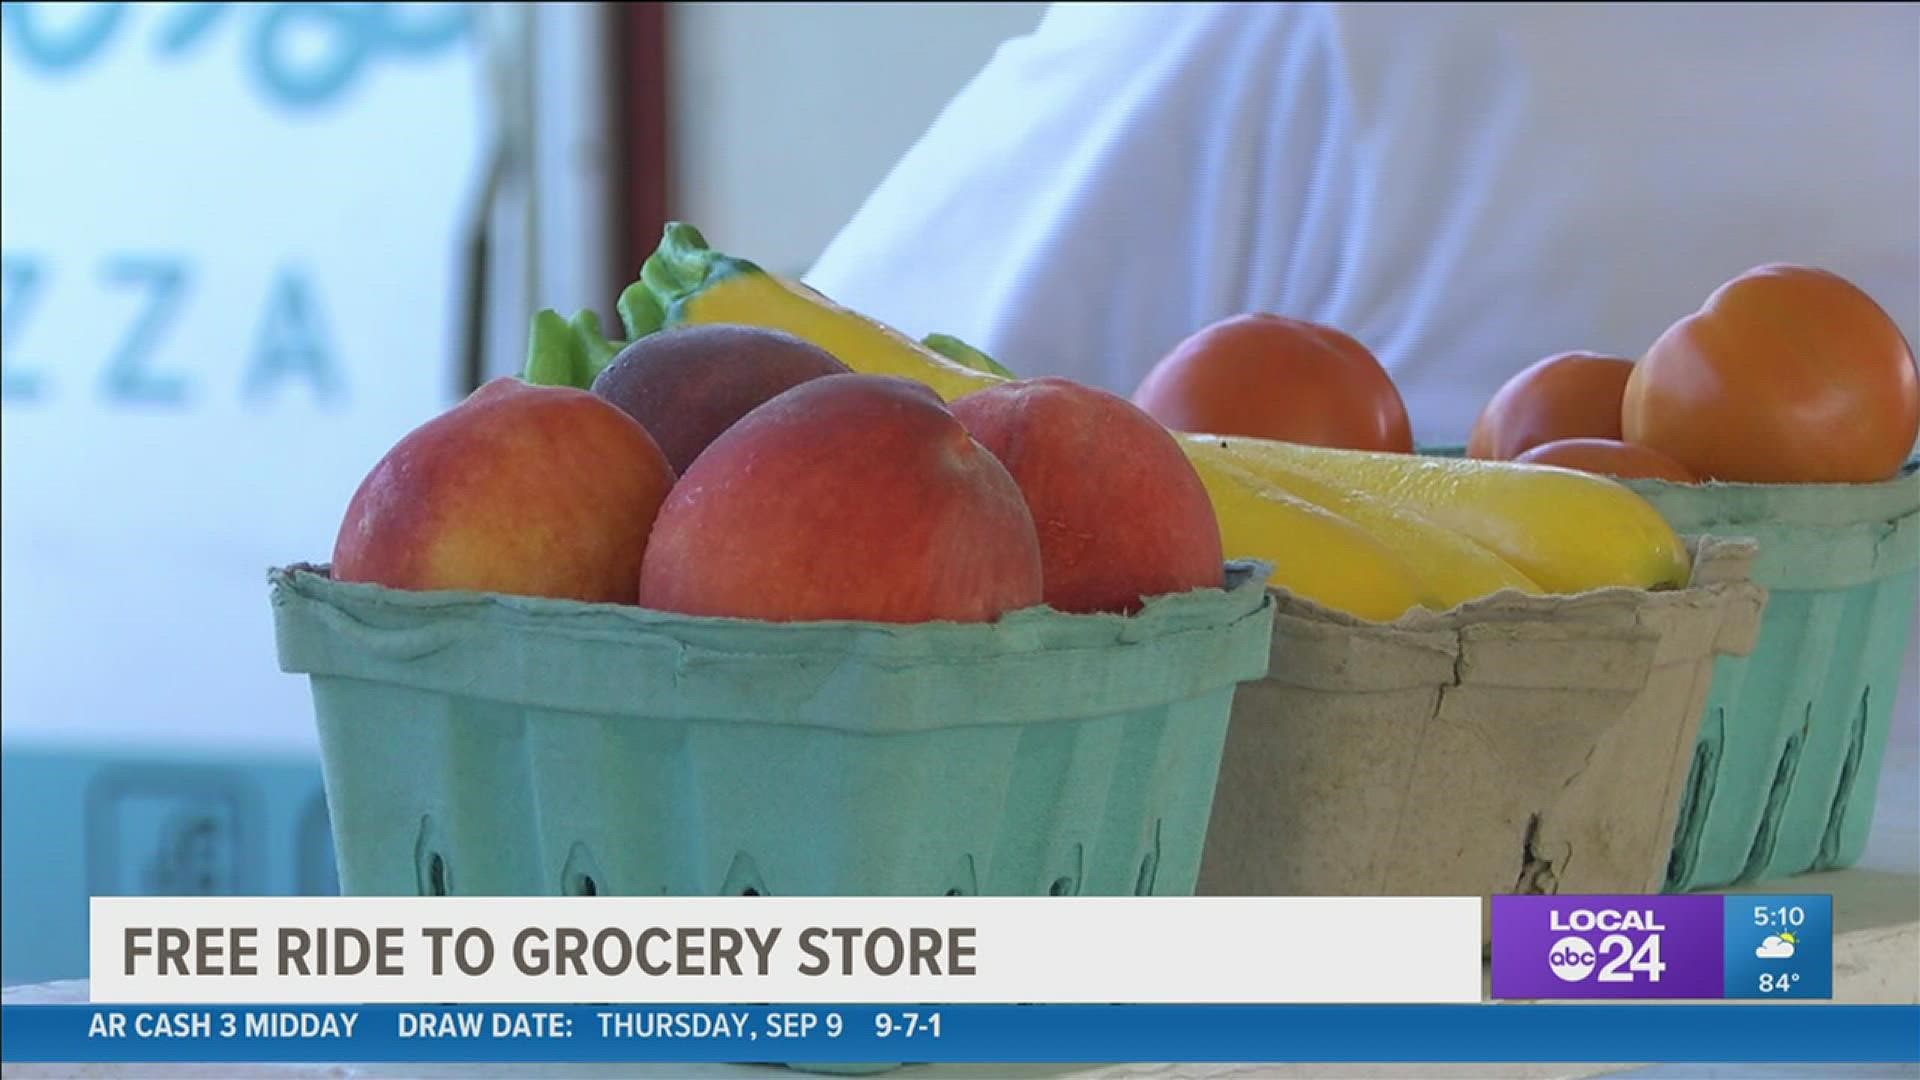 A new program is aimed at getting people in one Mid-South food desert to fresh food.